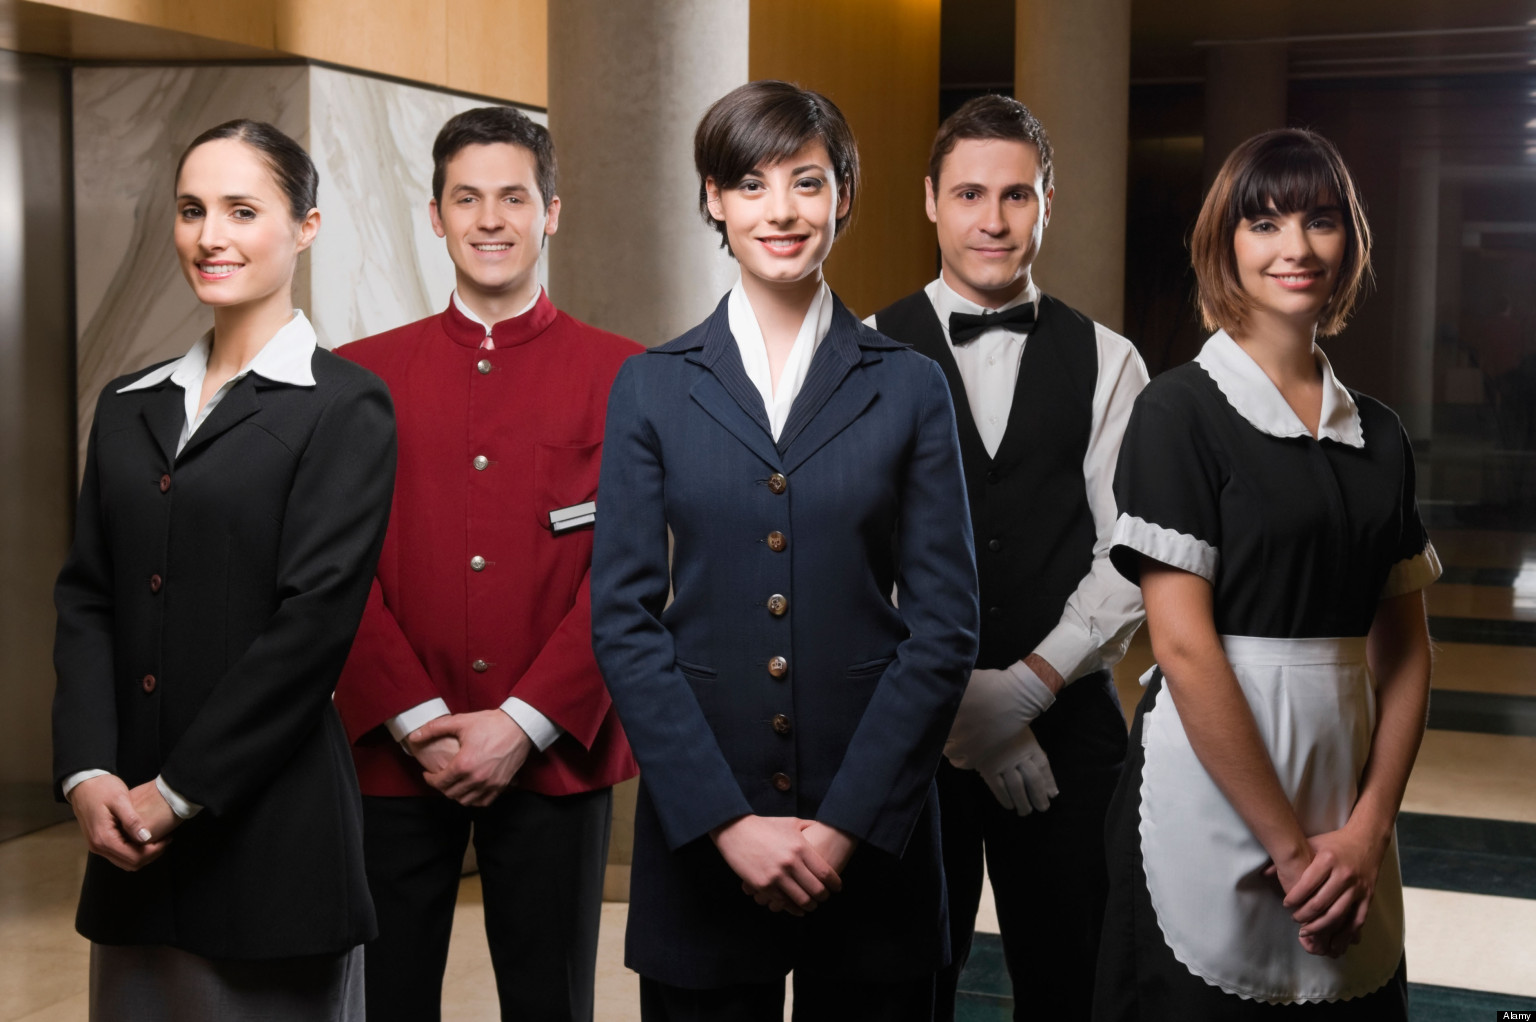 B62PW9 Hotel staff standing together and smiling